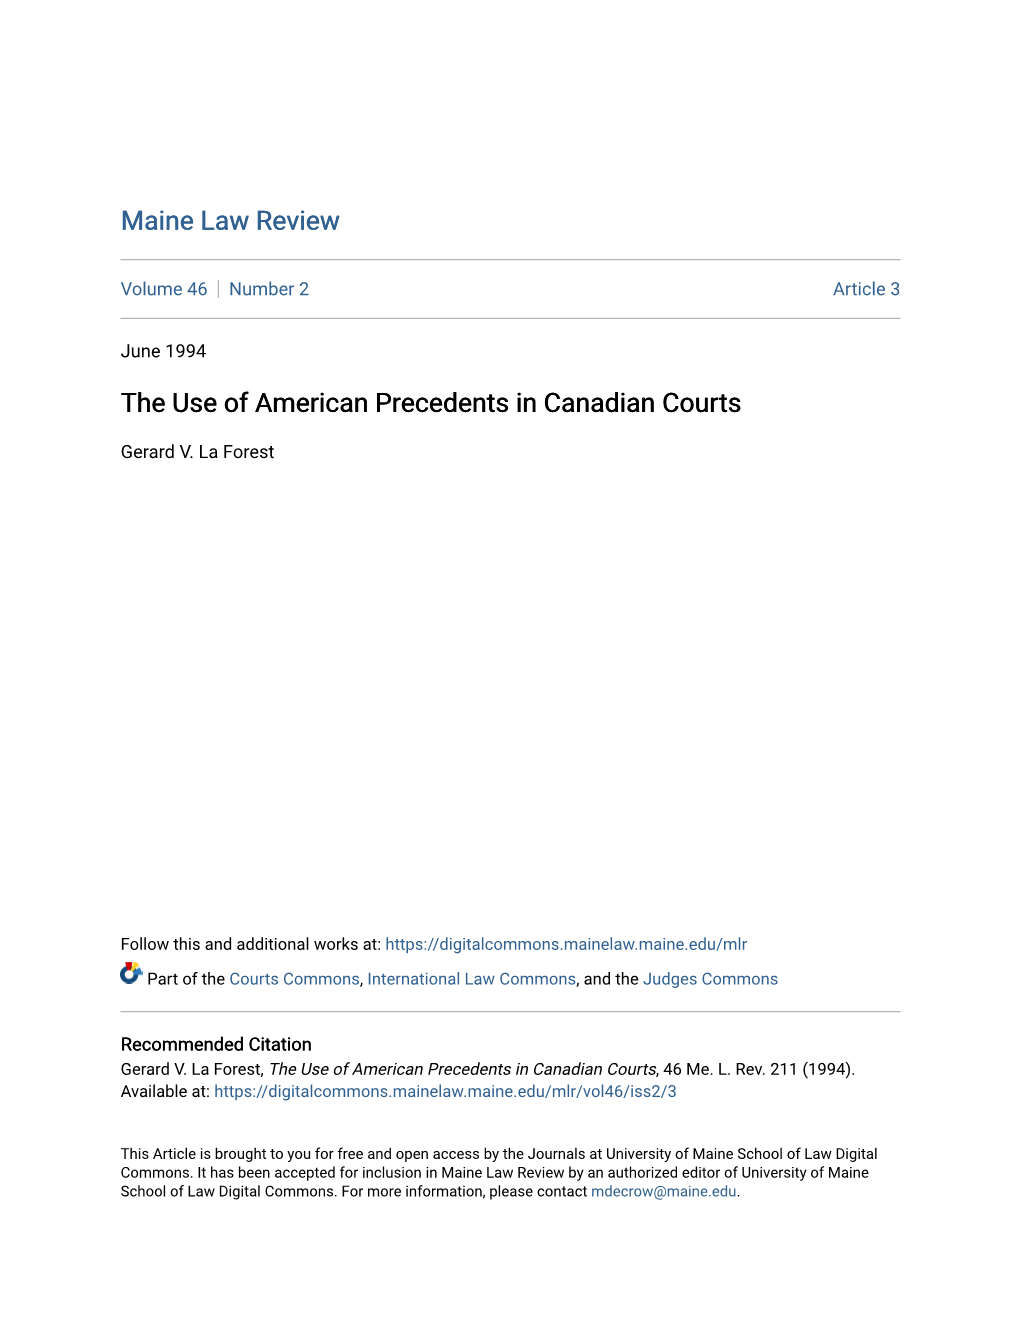 The Use of American Precedents in Canadian Courts